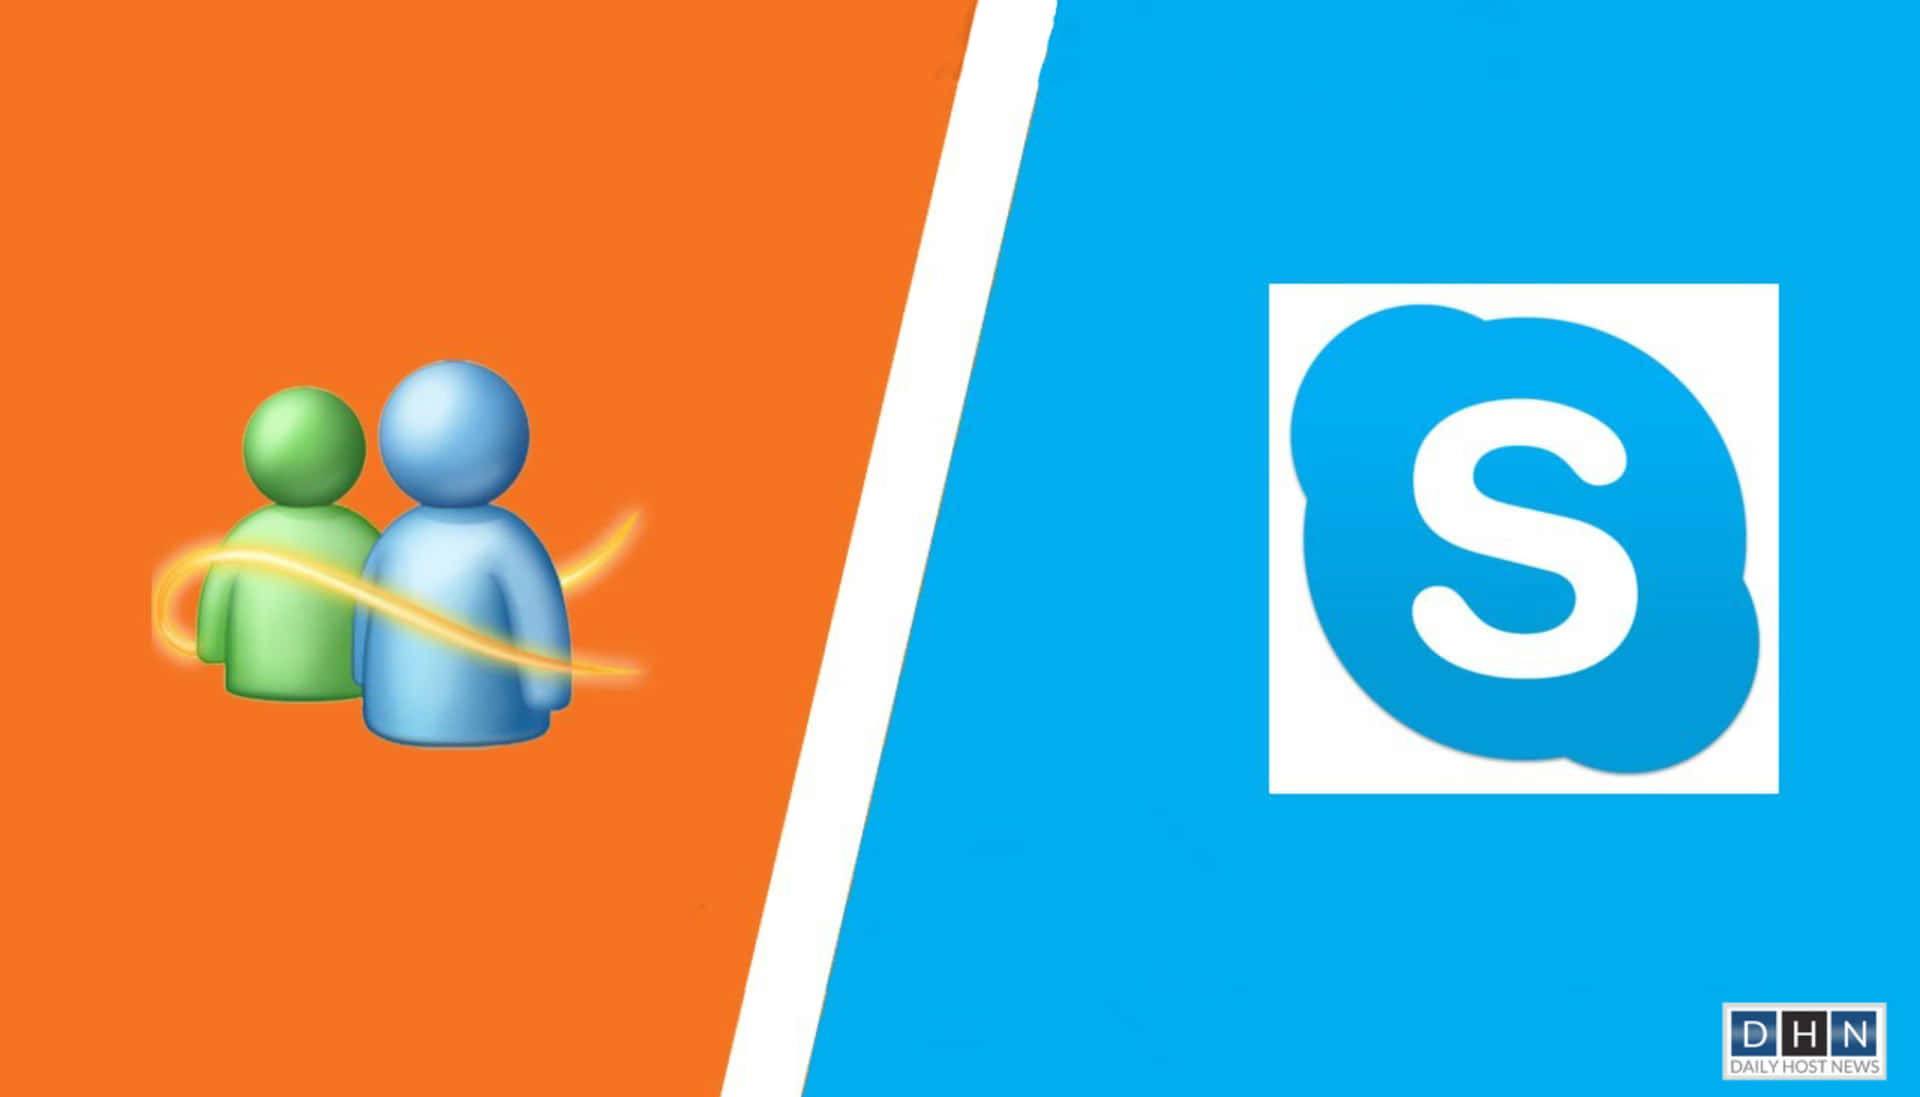 Msn And Skype Icons Wallpaper